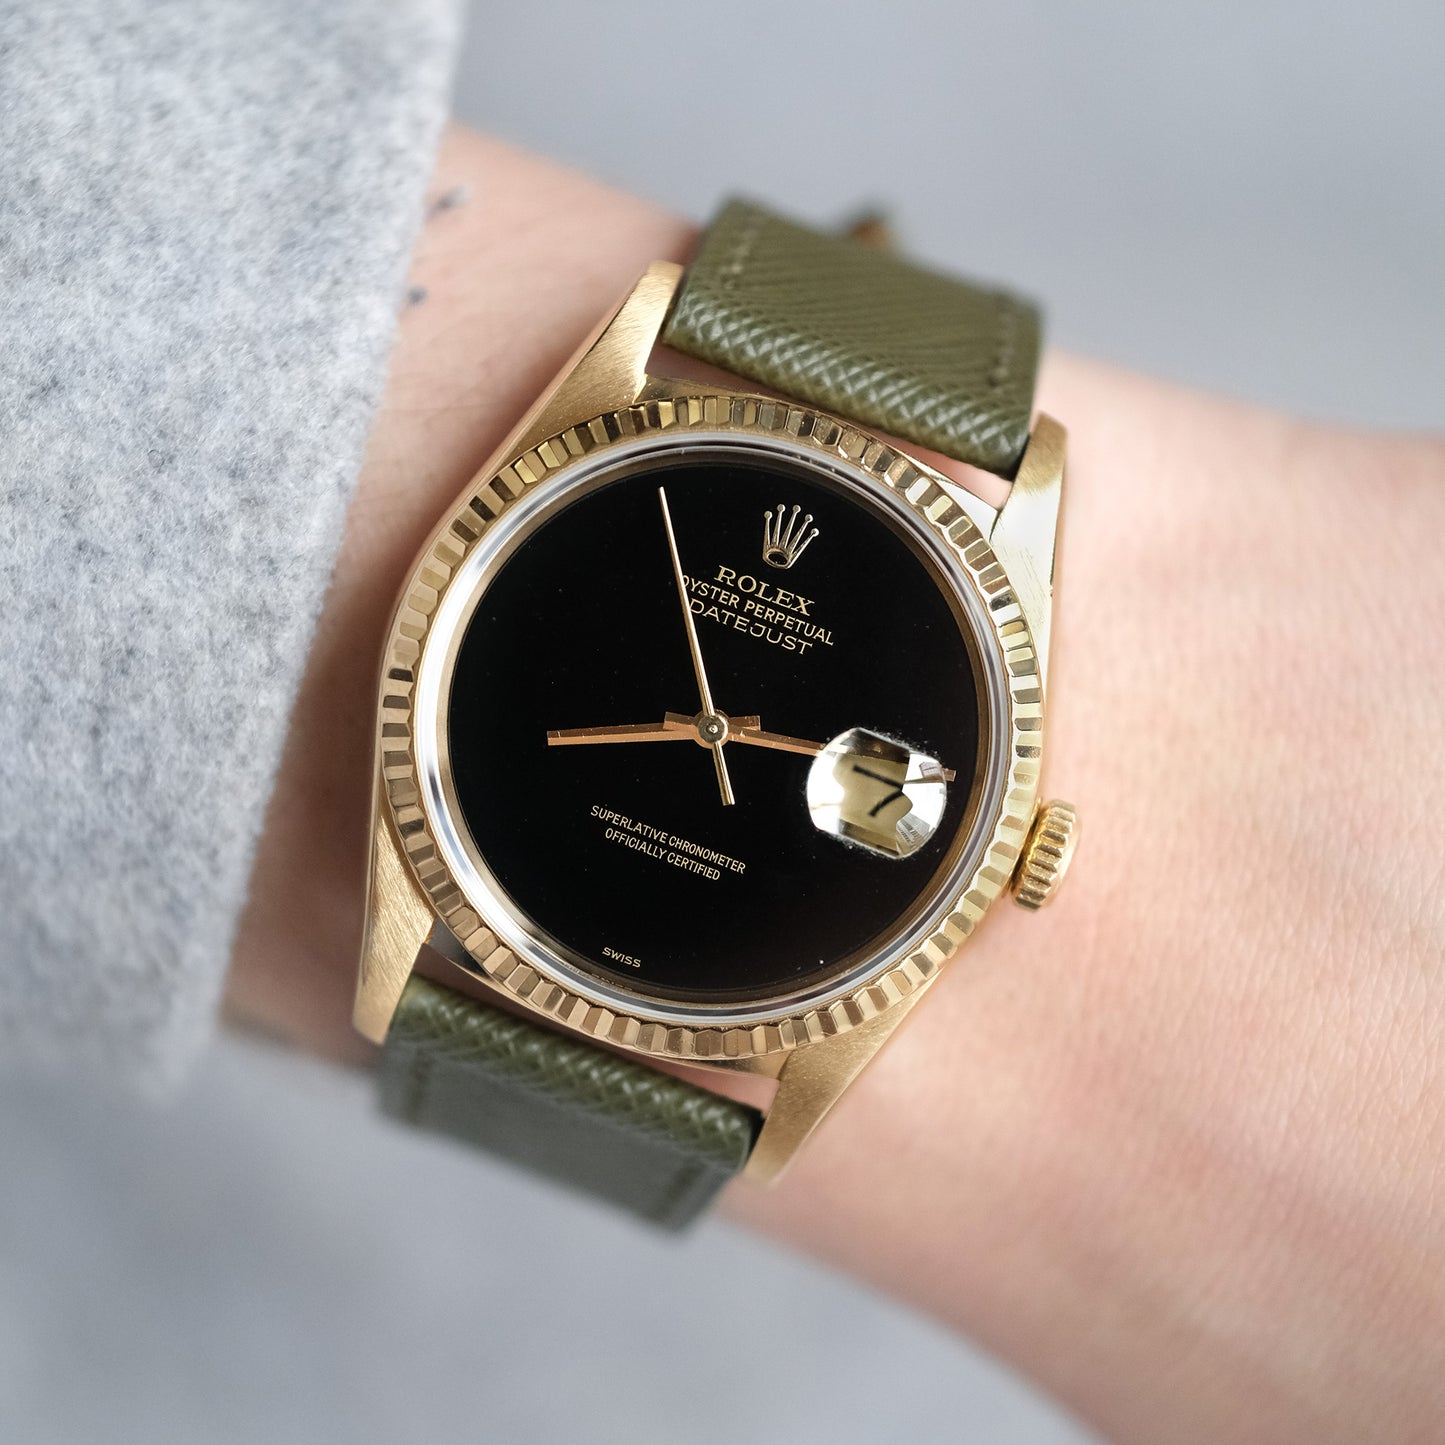 Rolex Datejust ref.16238 Onyx Dial from 1988